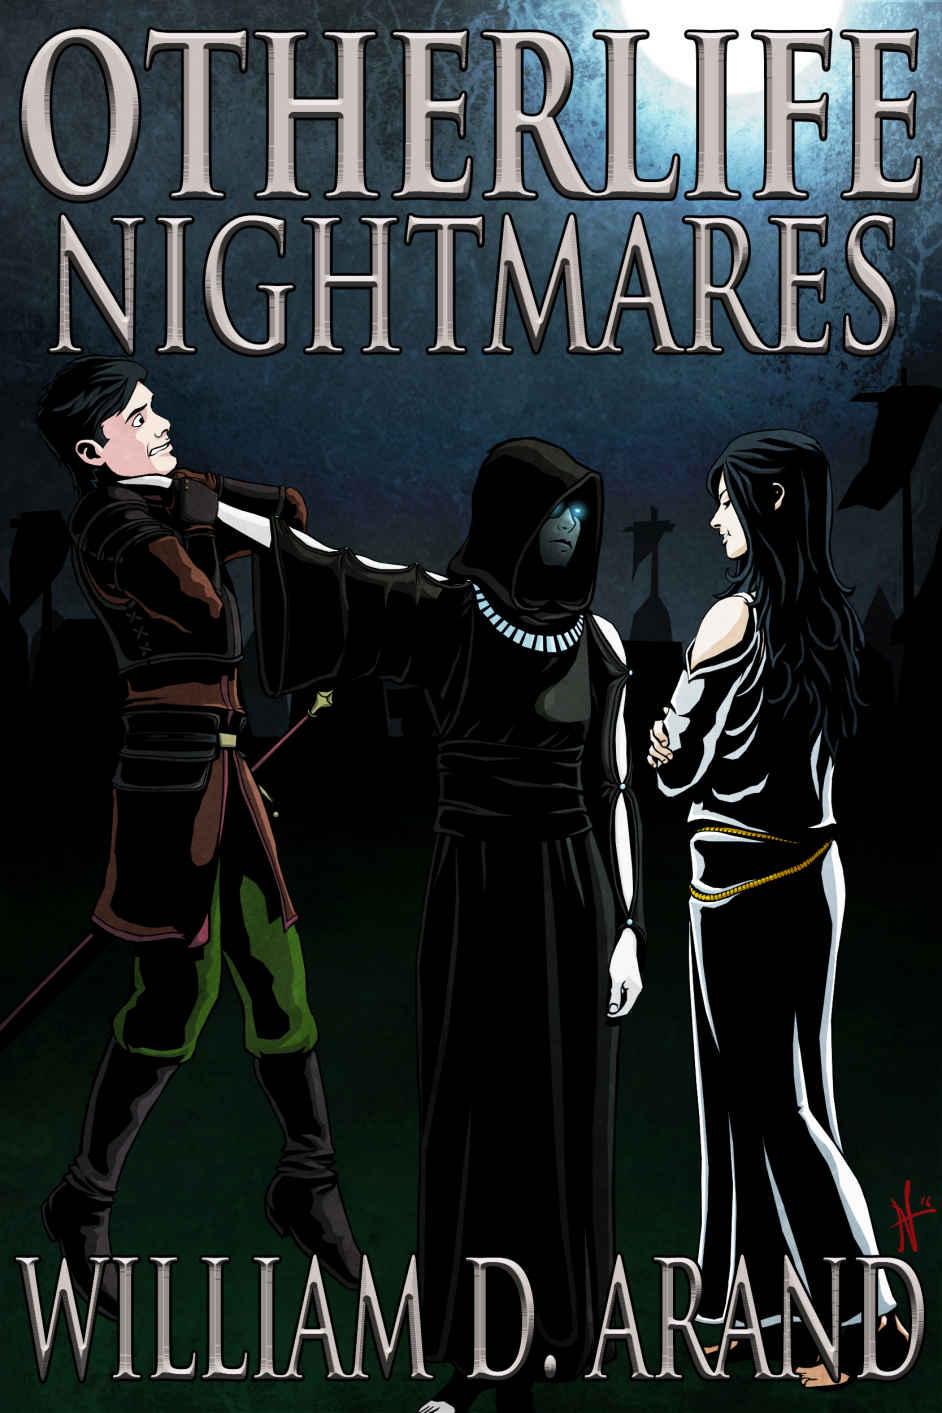 Otherlife Nightmares: The Selfless Hero Trilogy by William D. Arand